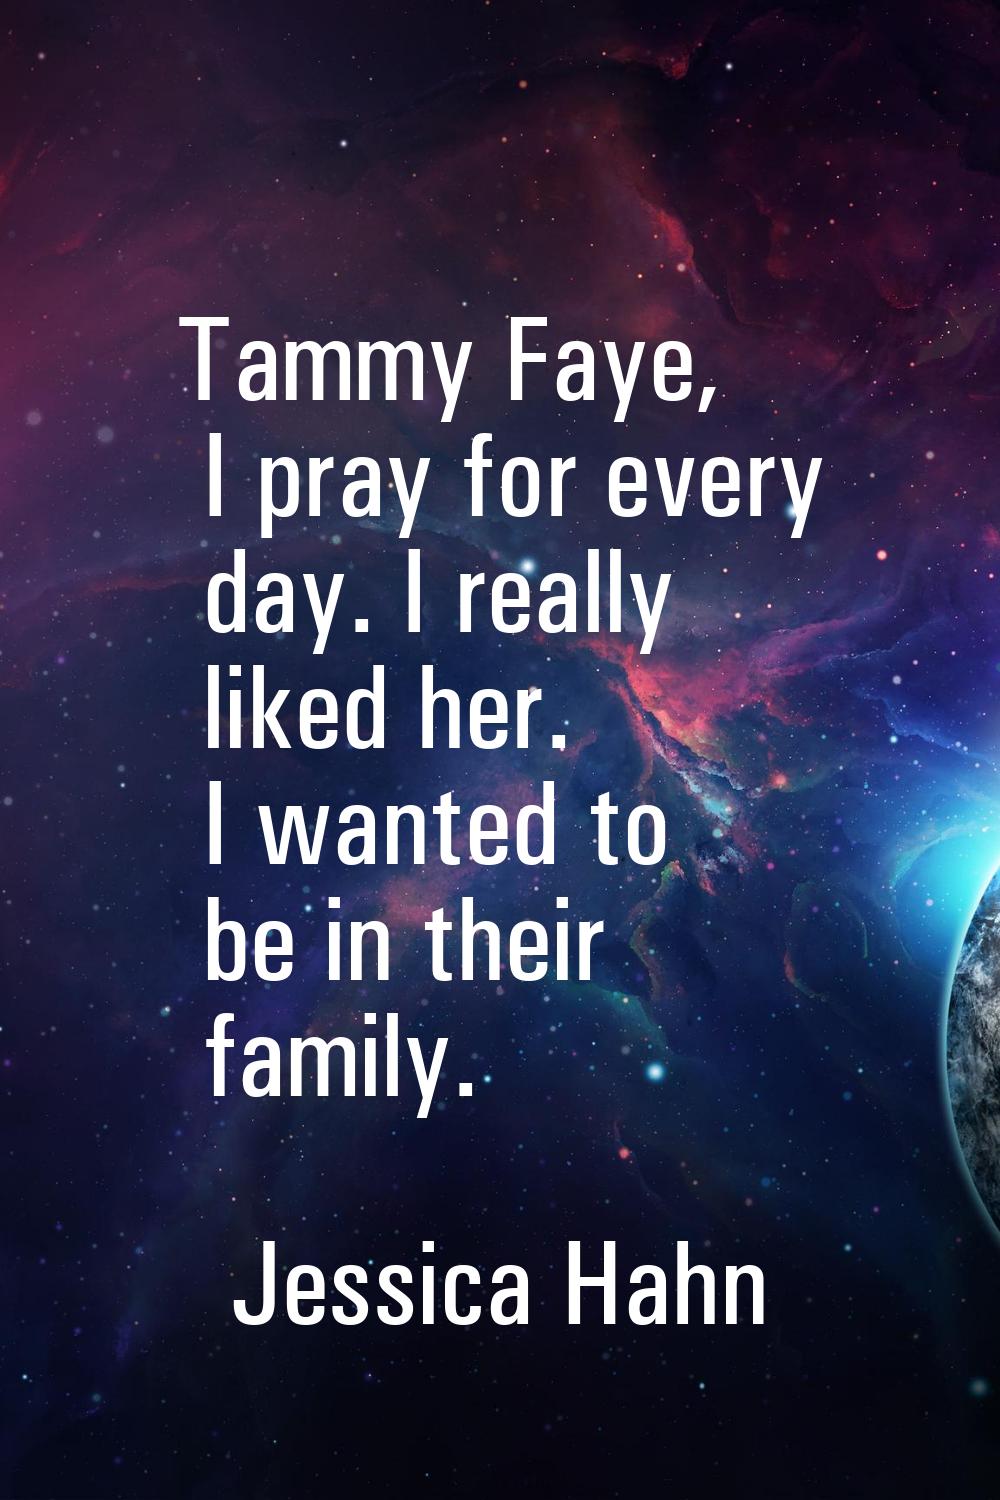 Tammy Faye, I pray for every day. I really liked her. I wanted to be in their family.